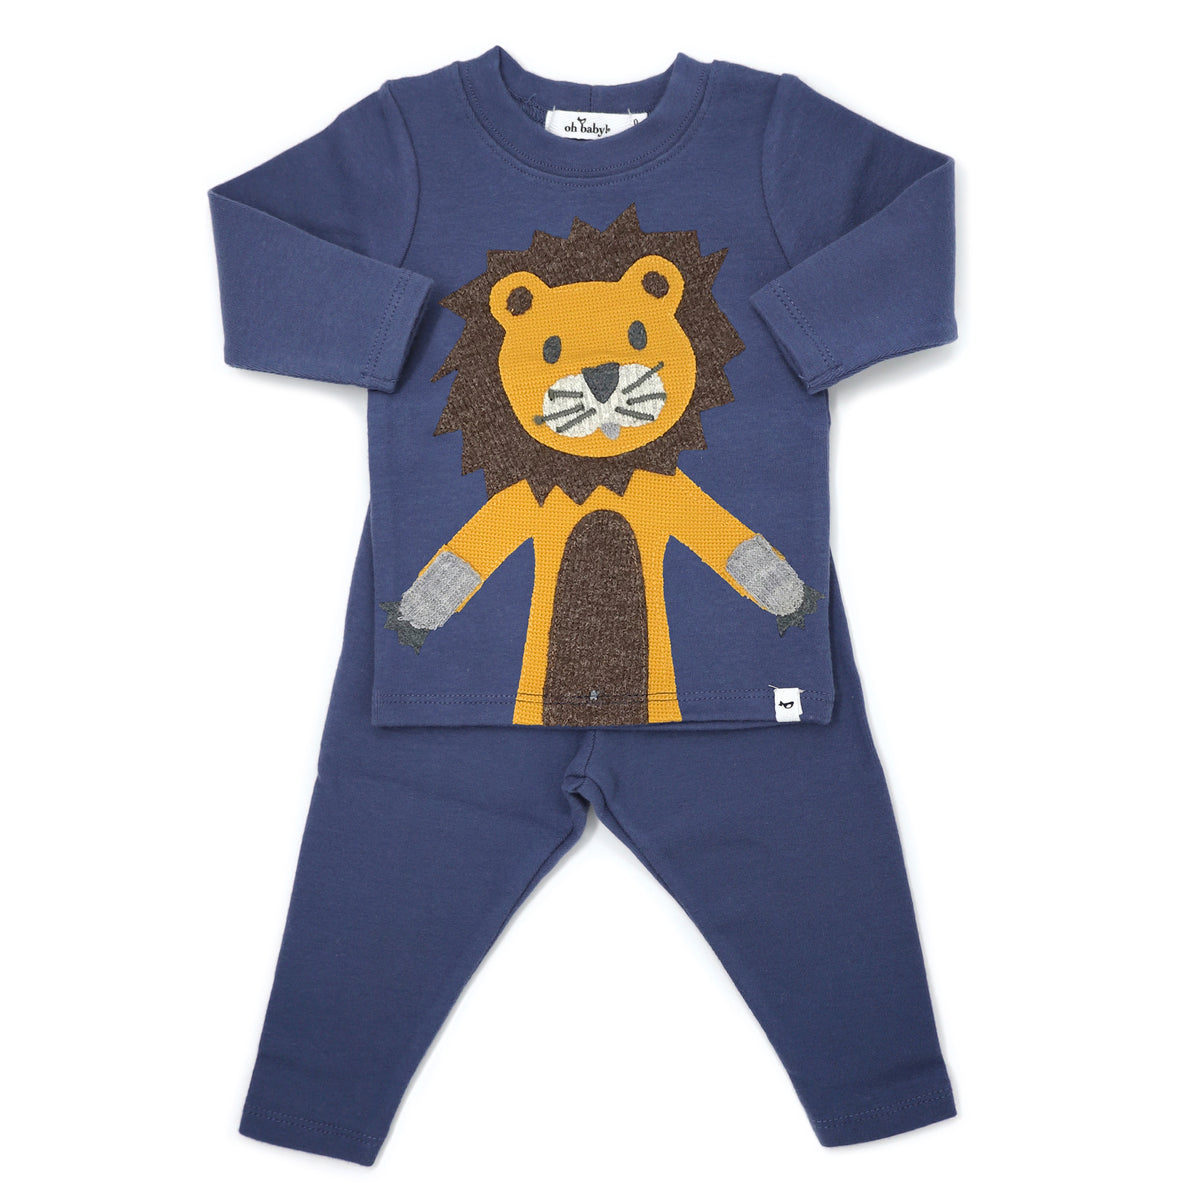 oh baby! Two Piece Set Large Yellow Lion - Denim